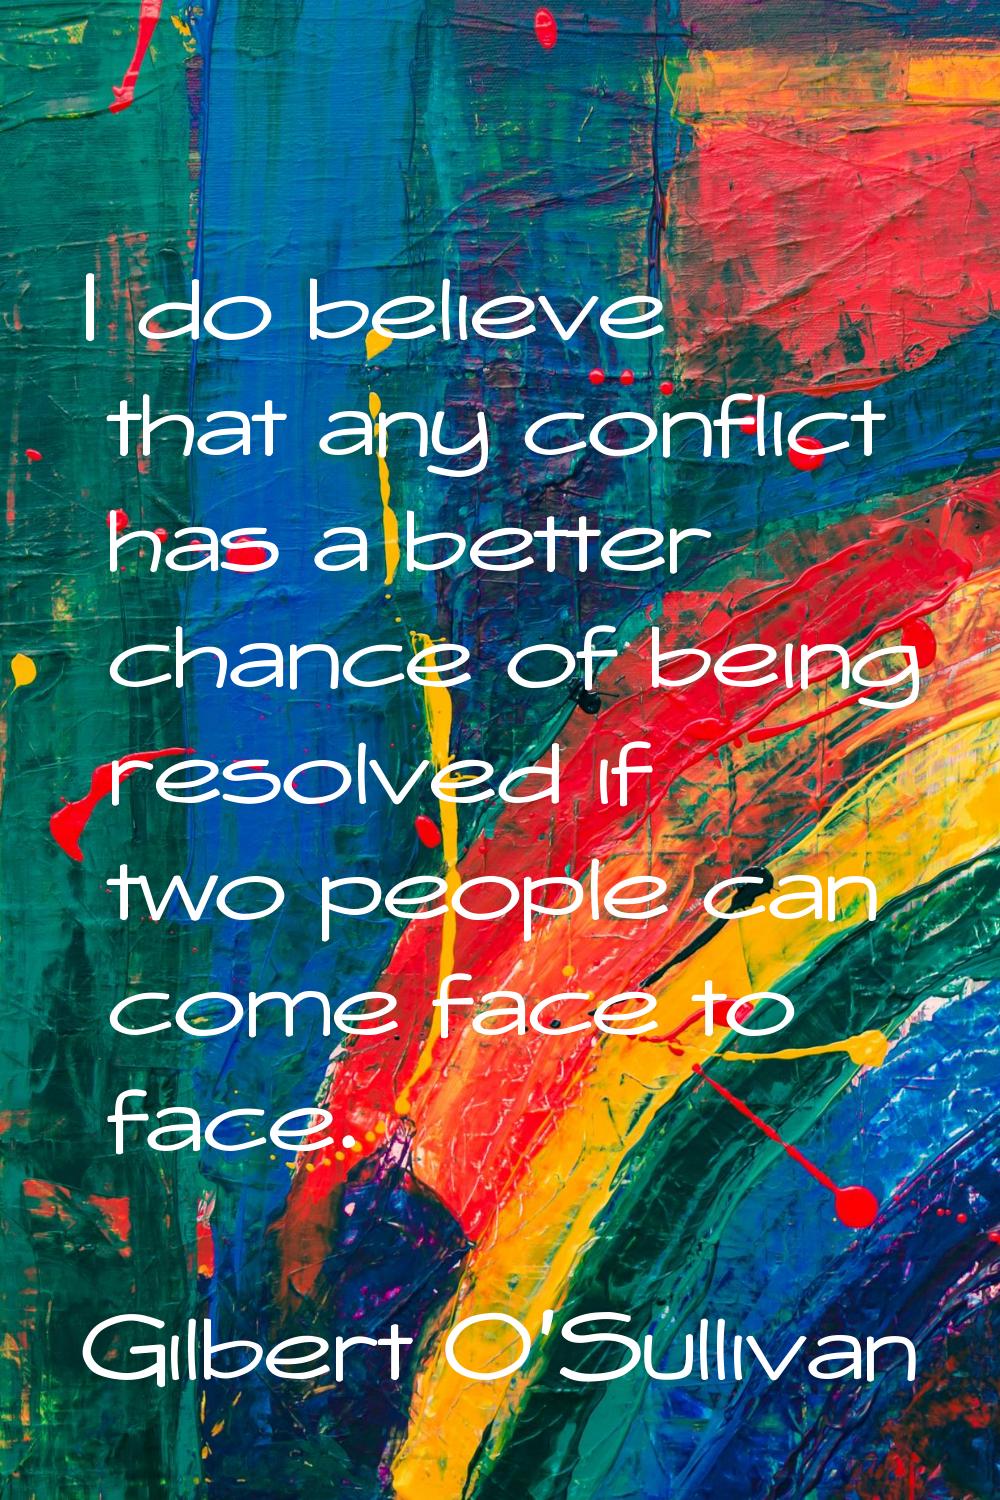 I do believe that any conflict has a better chance of being resolved if two people can come face to